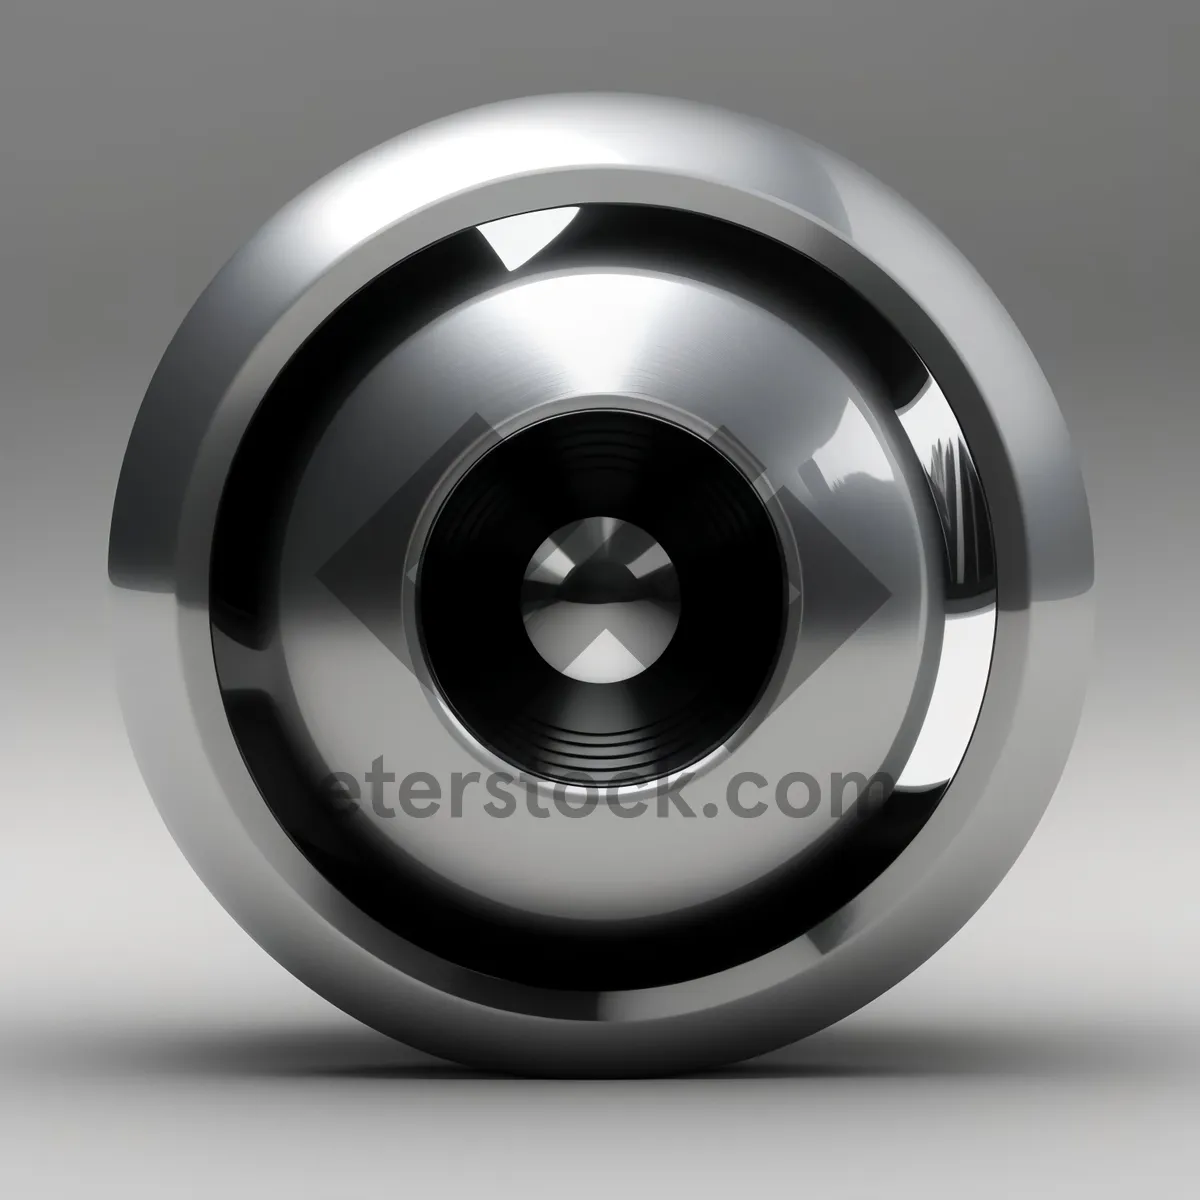 Picture of 3D Audio Icon with Reflective Black Disk Design